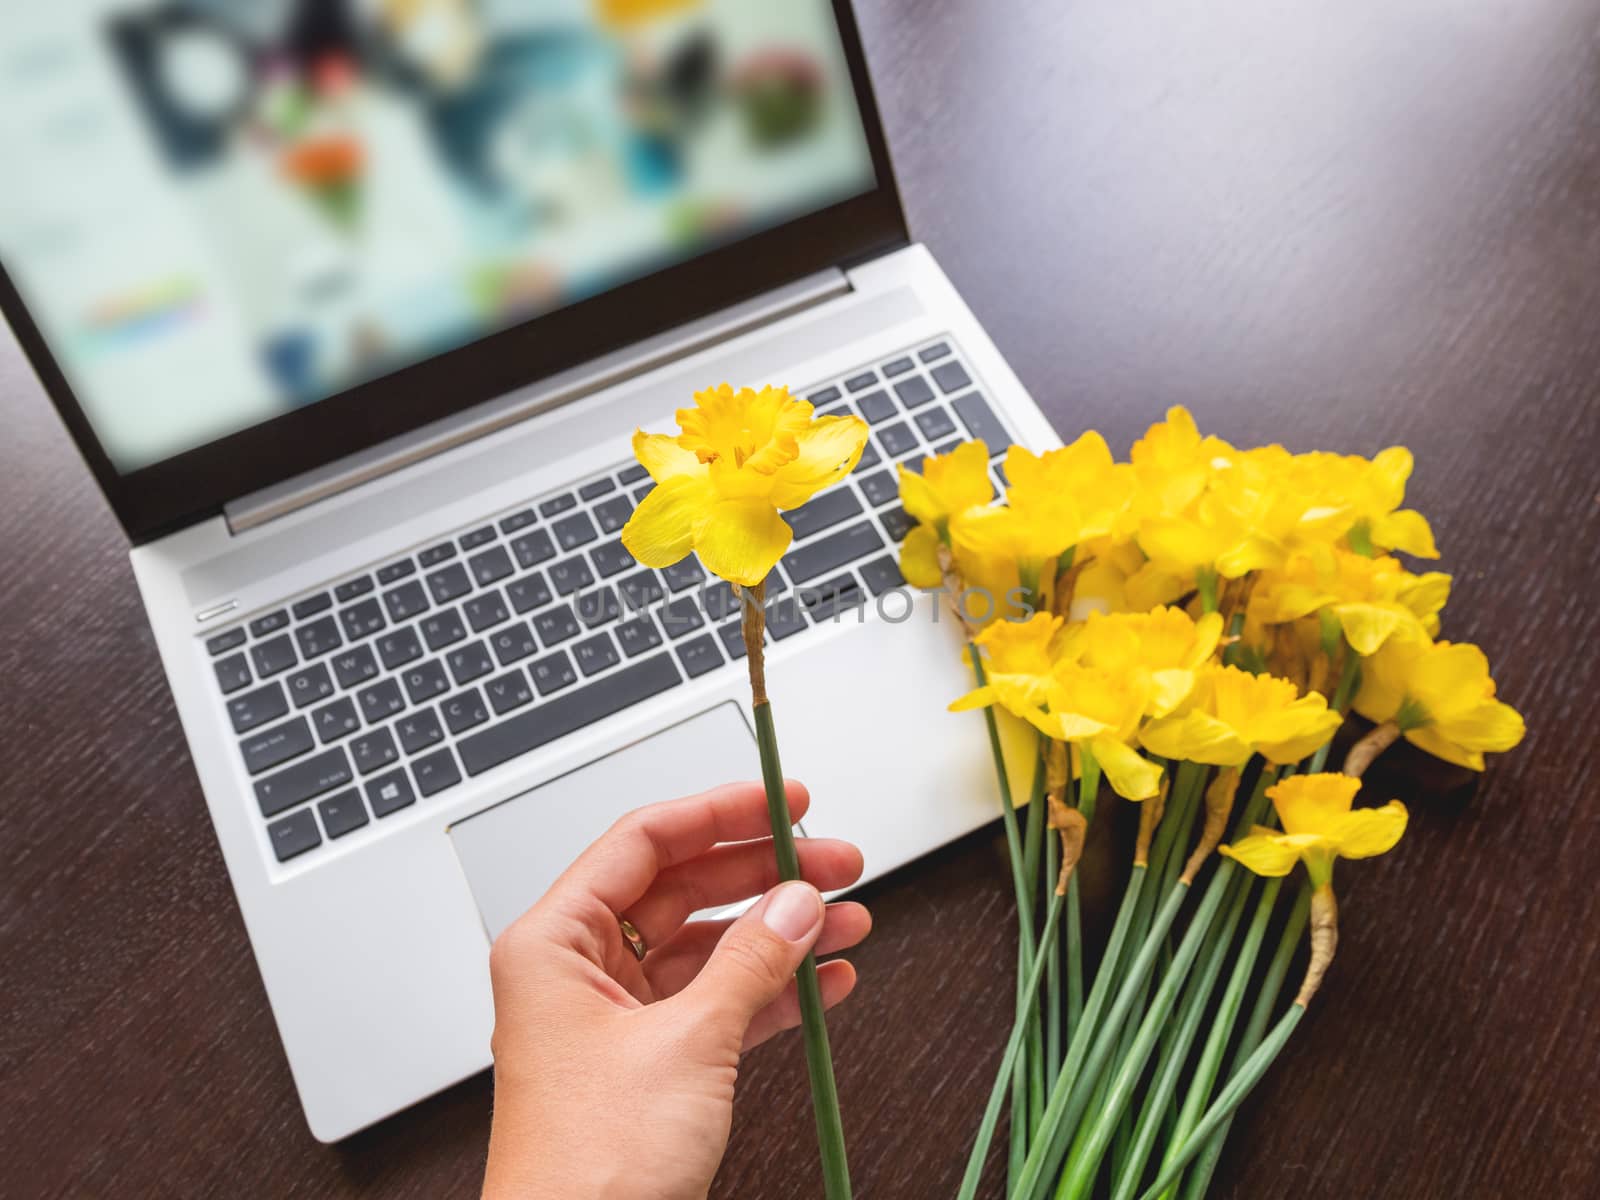 Bouquet of Narcissus or daffodils lying on silver metal laptop. Bright yellow flowers on portable device and in woman's hand. Wooden background. by aksenovko